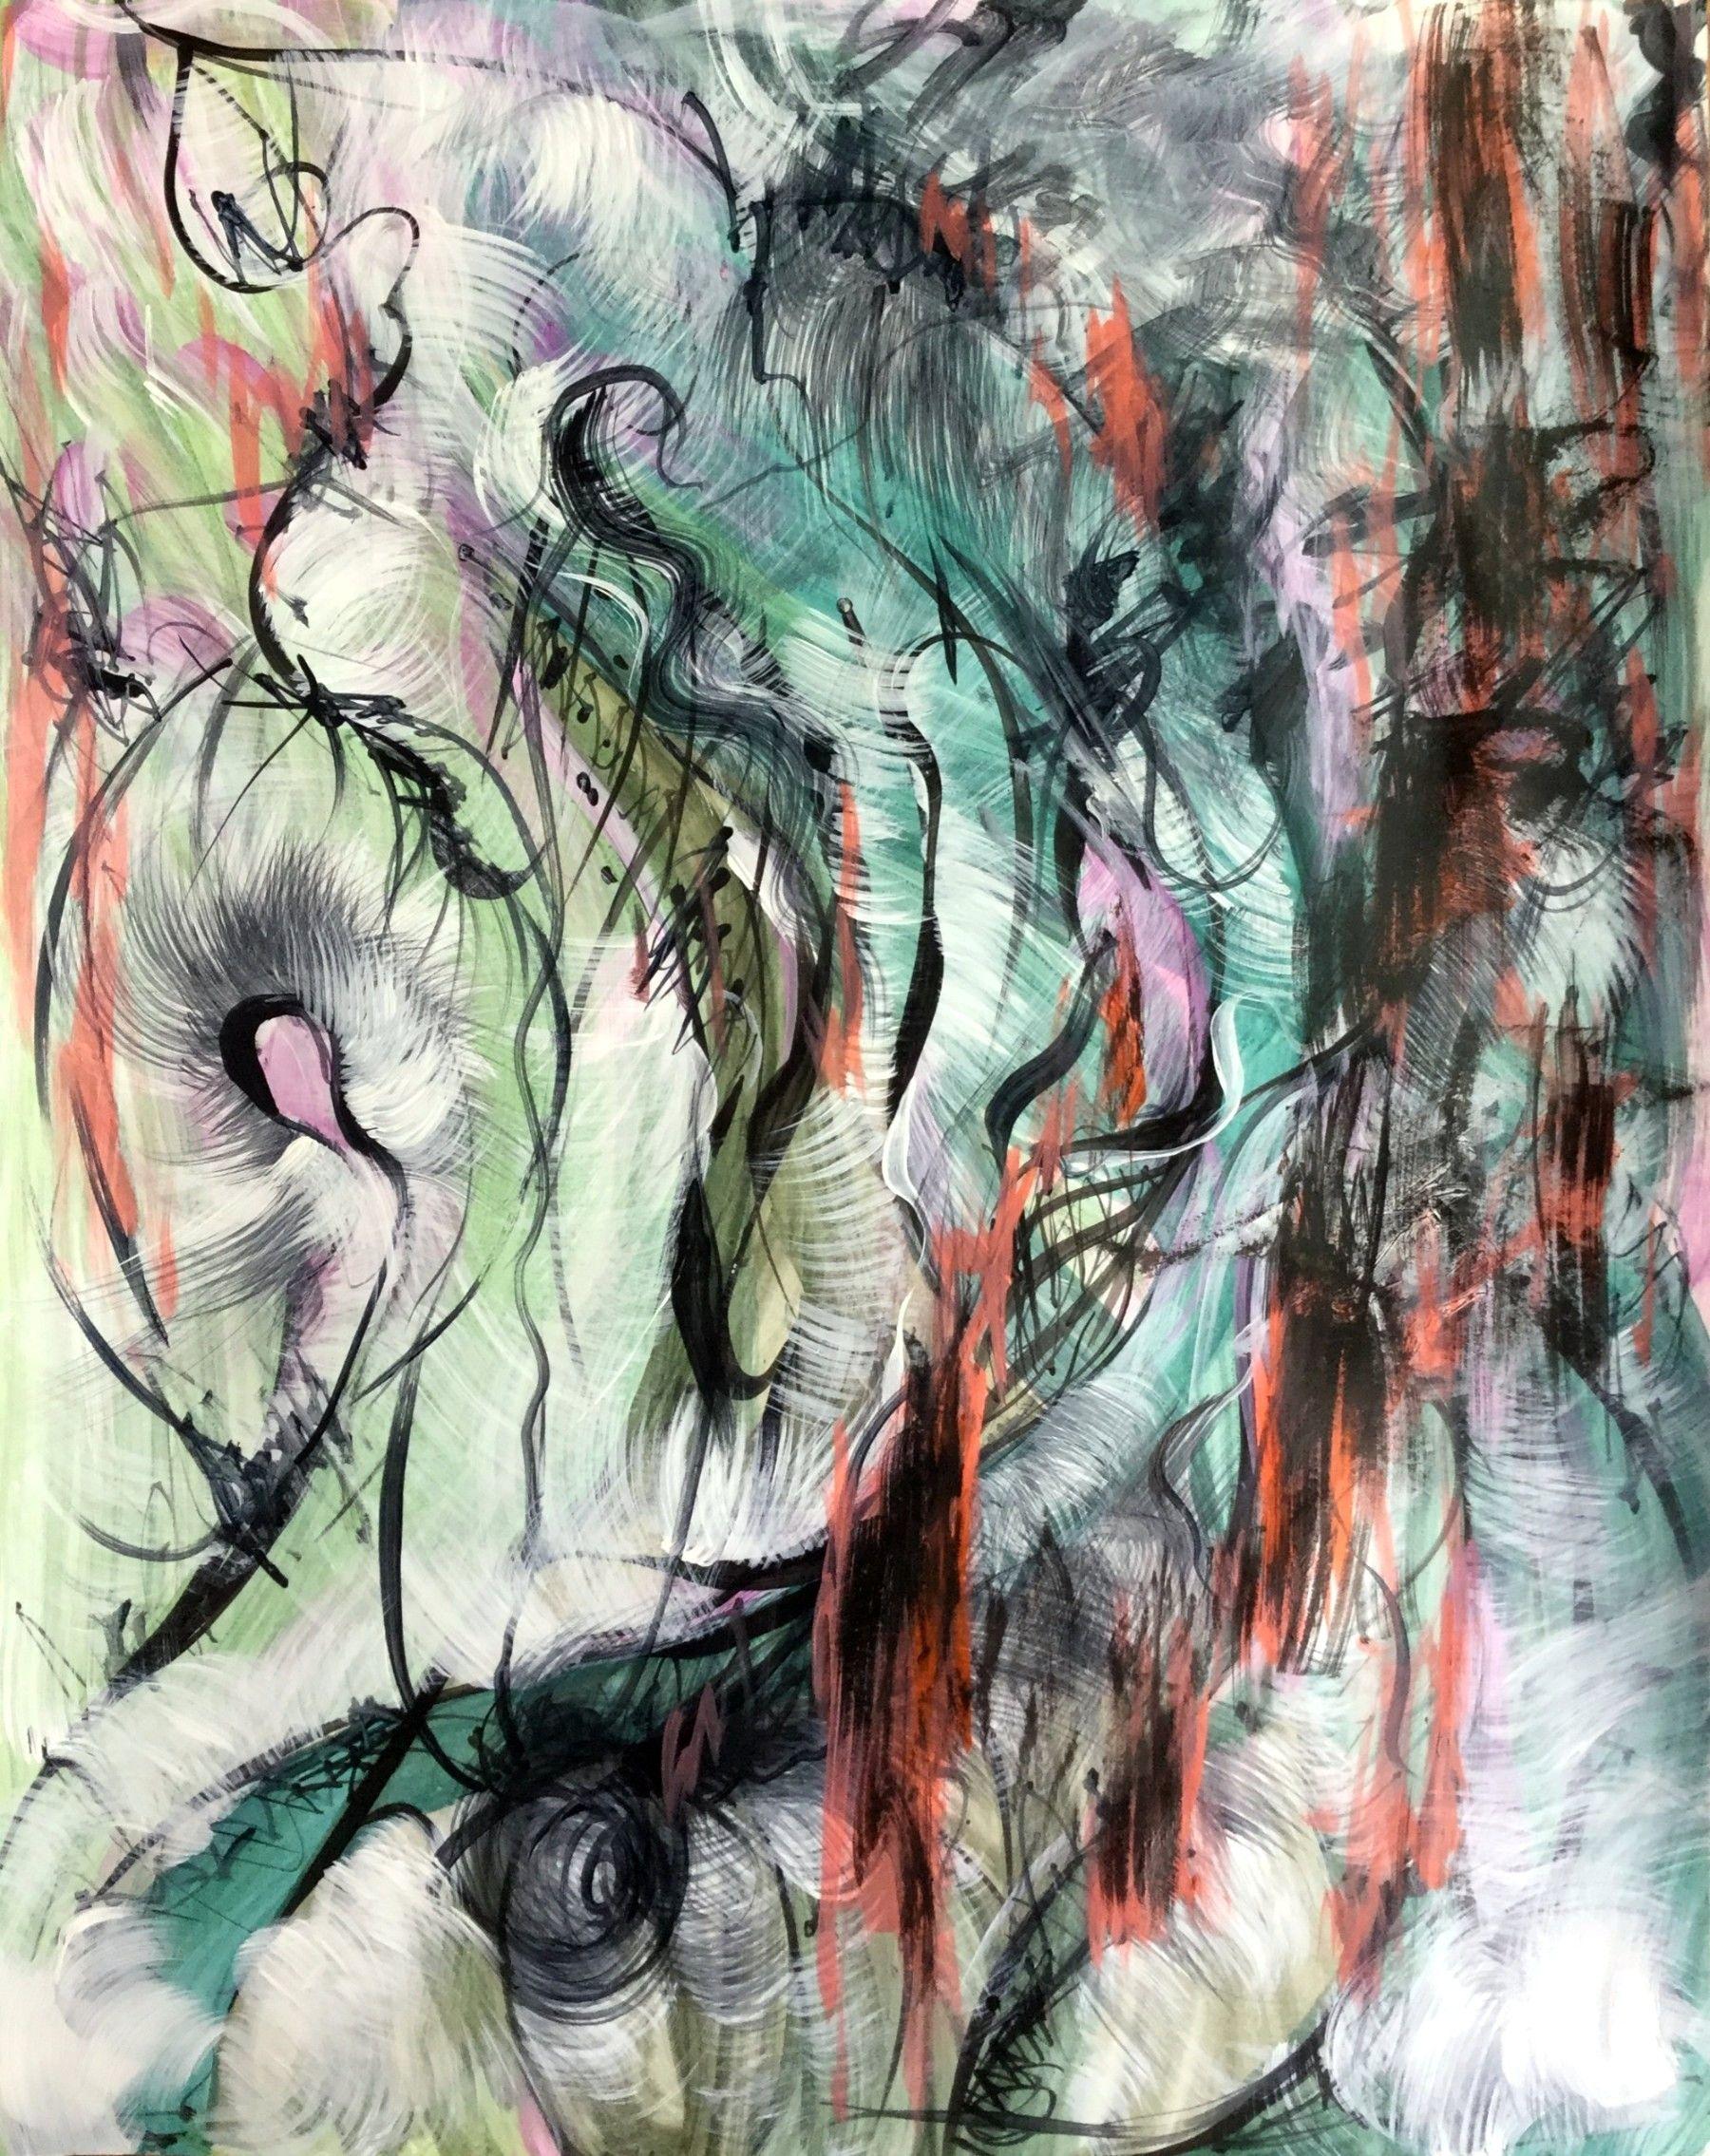 S H I N O I D Abstract Painting - Fish In Moss, Painting, Acrylic on Paper